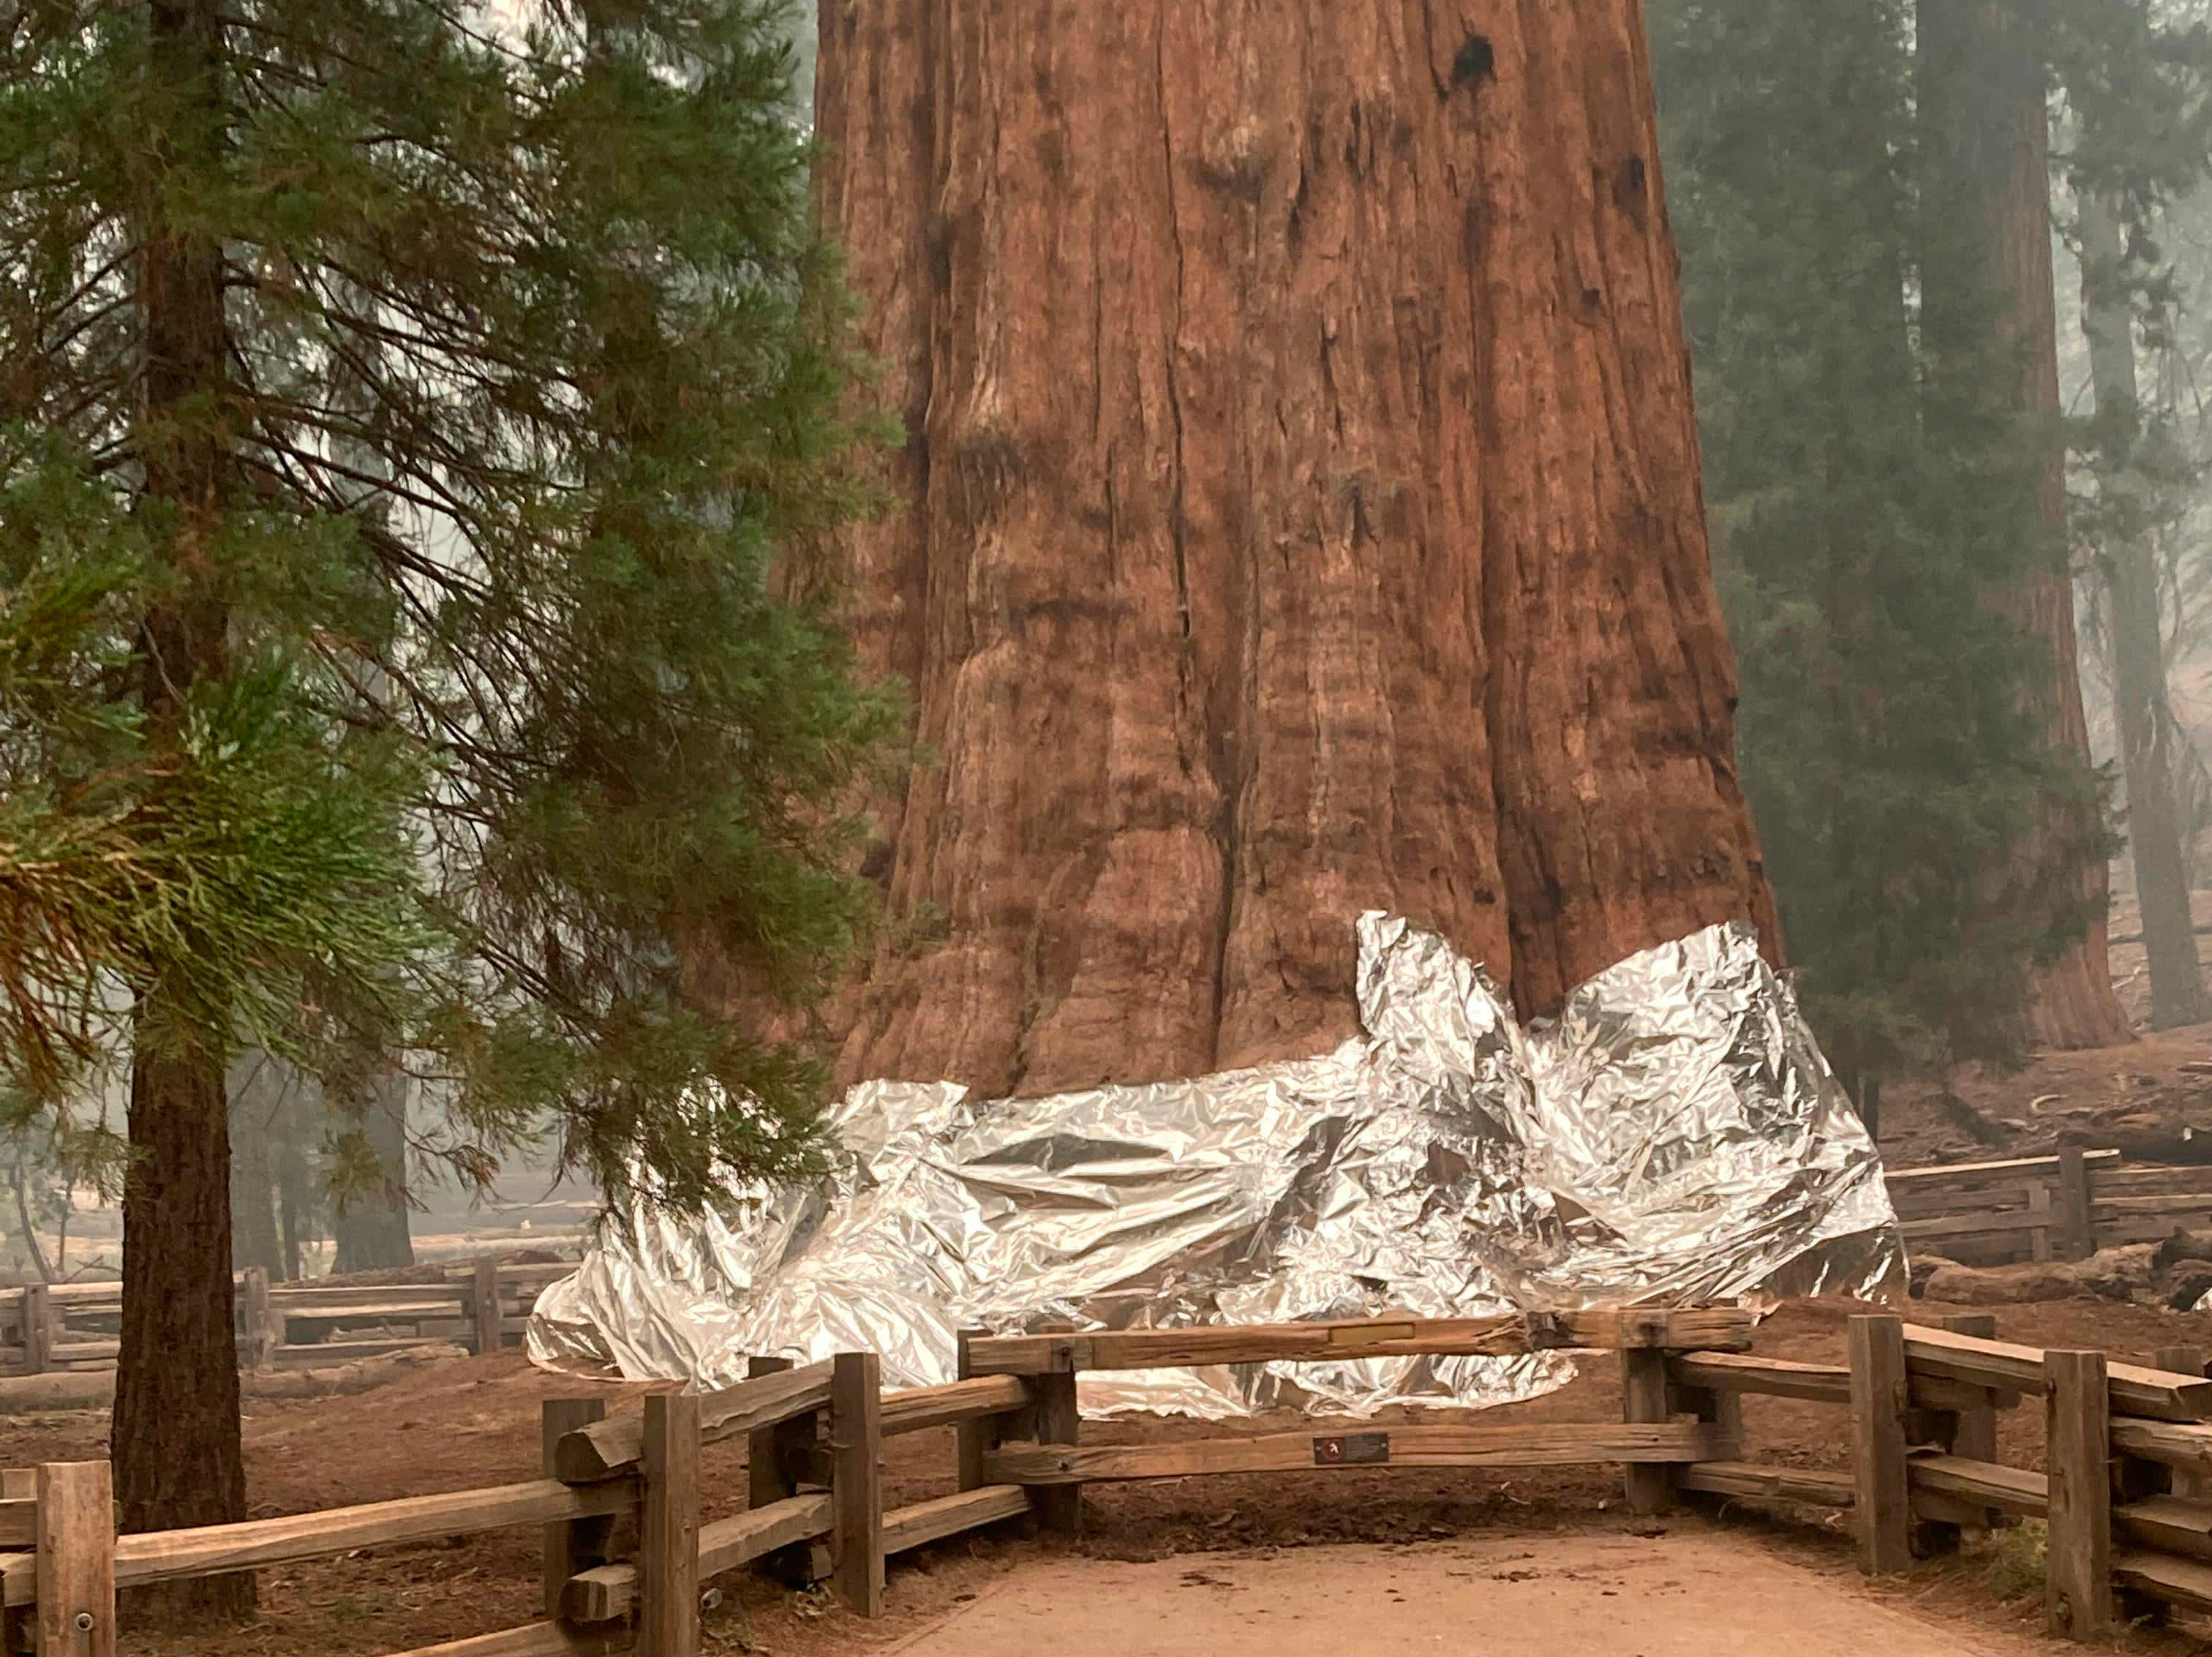 California firefighters wrap base of world's largest tree in fireproof blankets ..